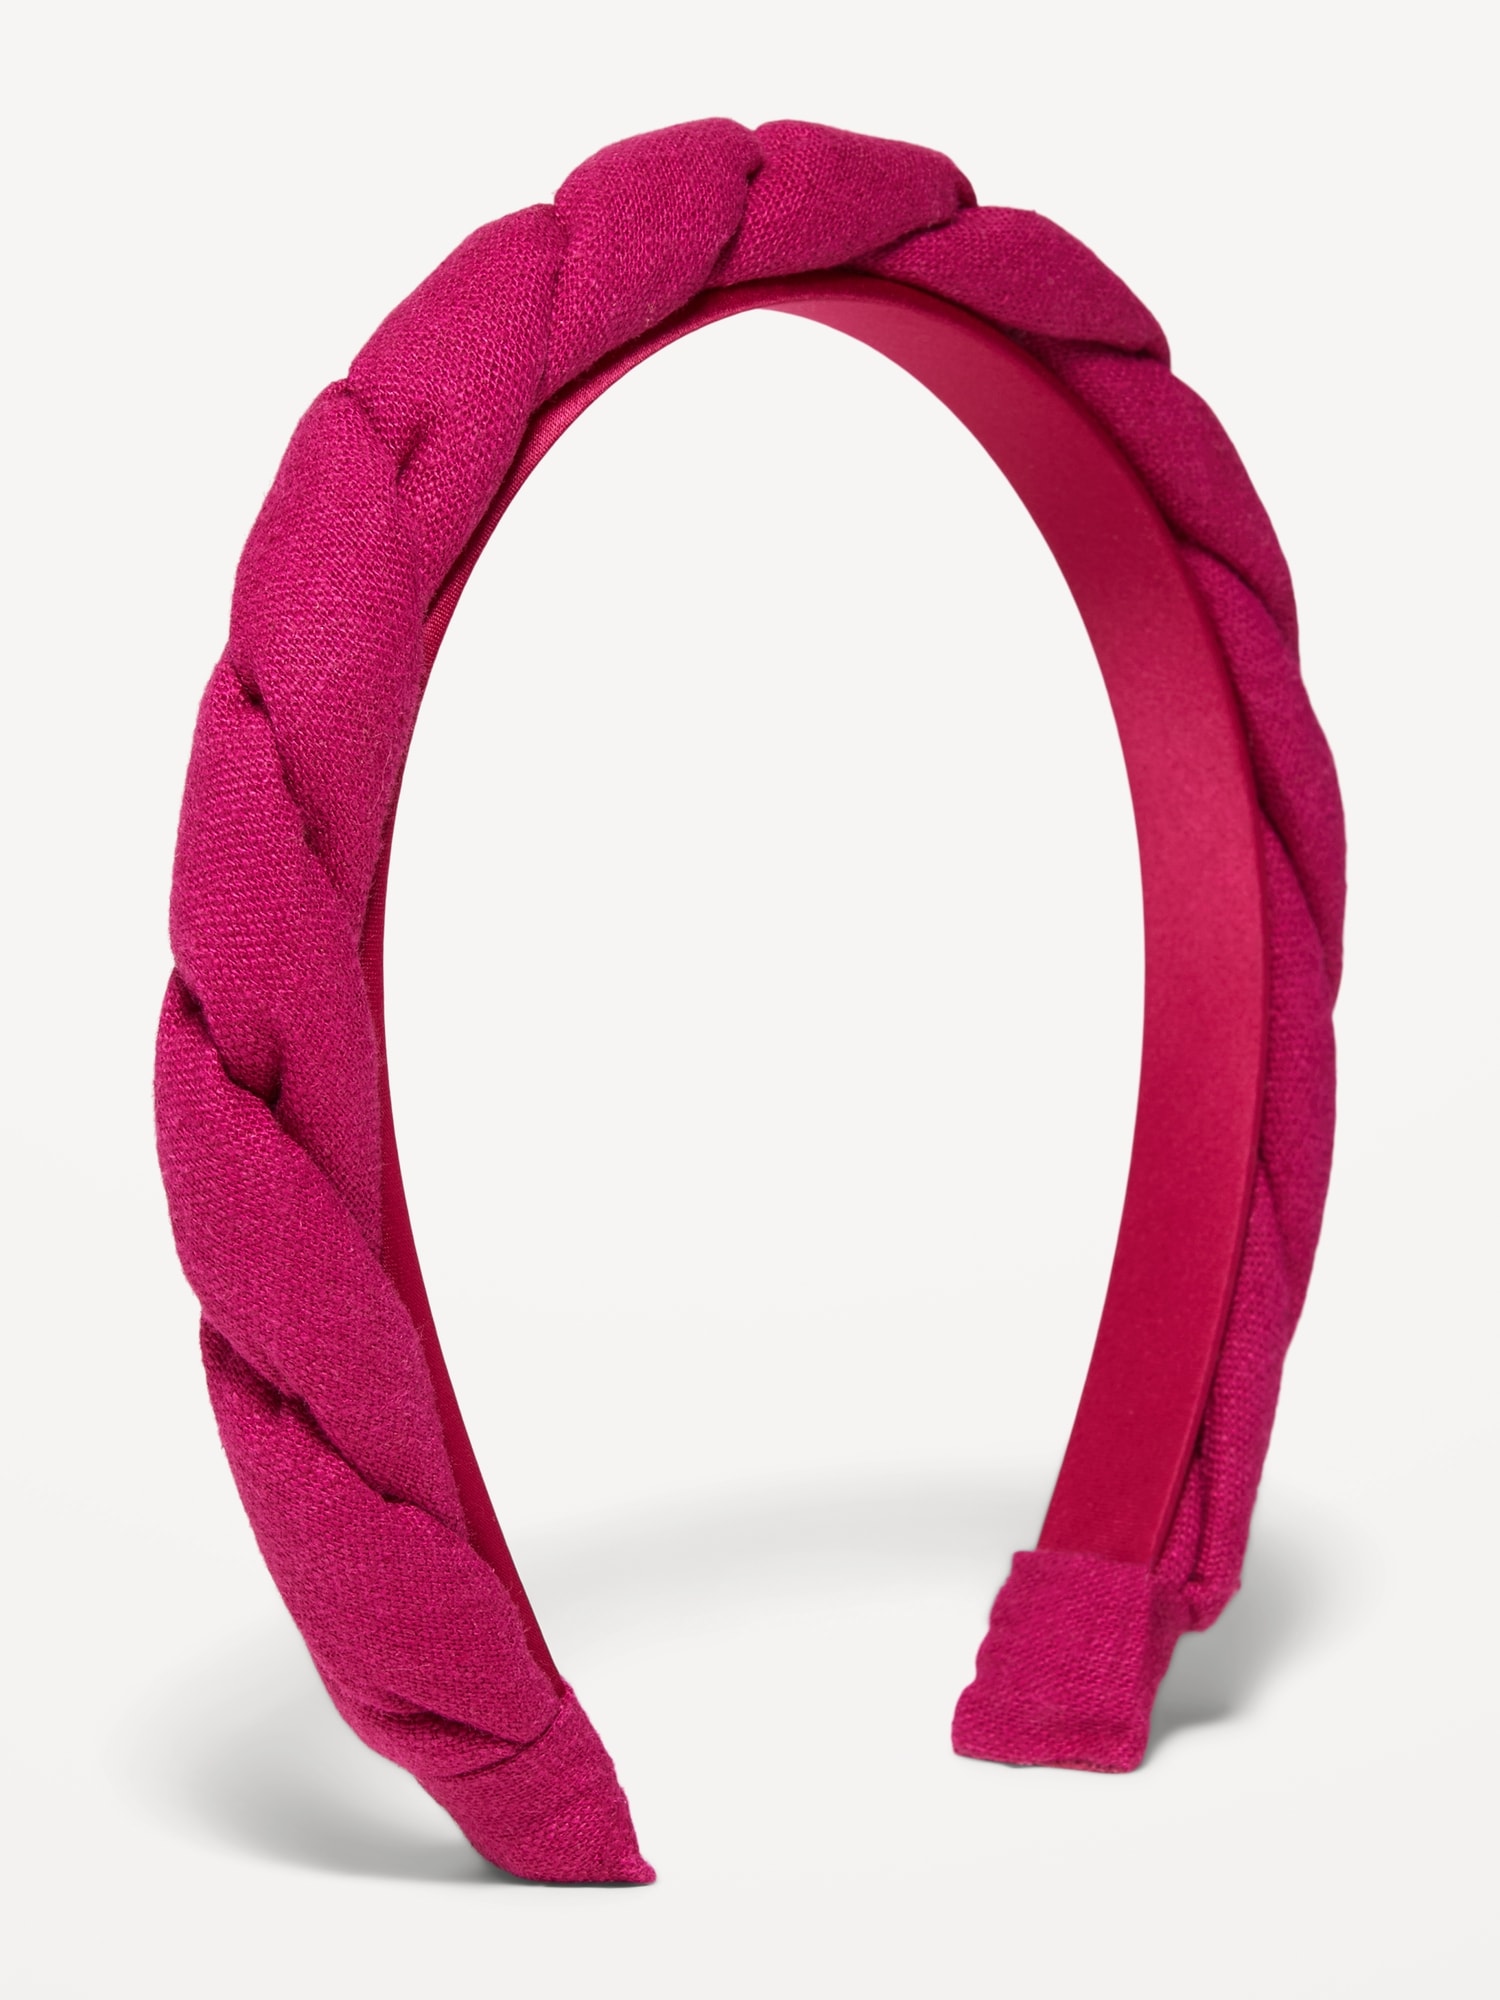 Old Navy Braided-Woven Headband for Girls pink. 1